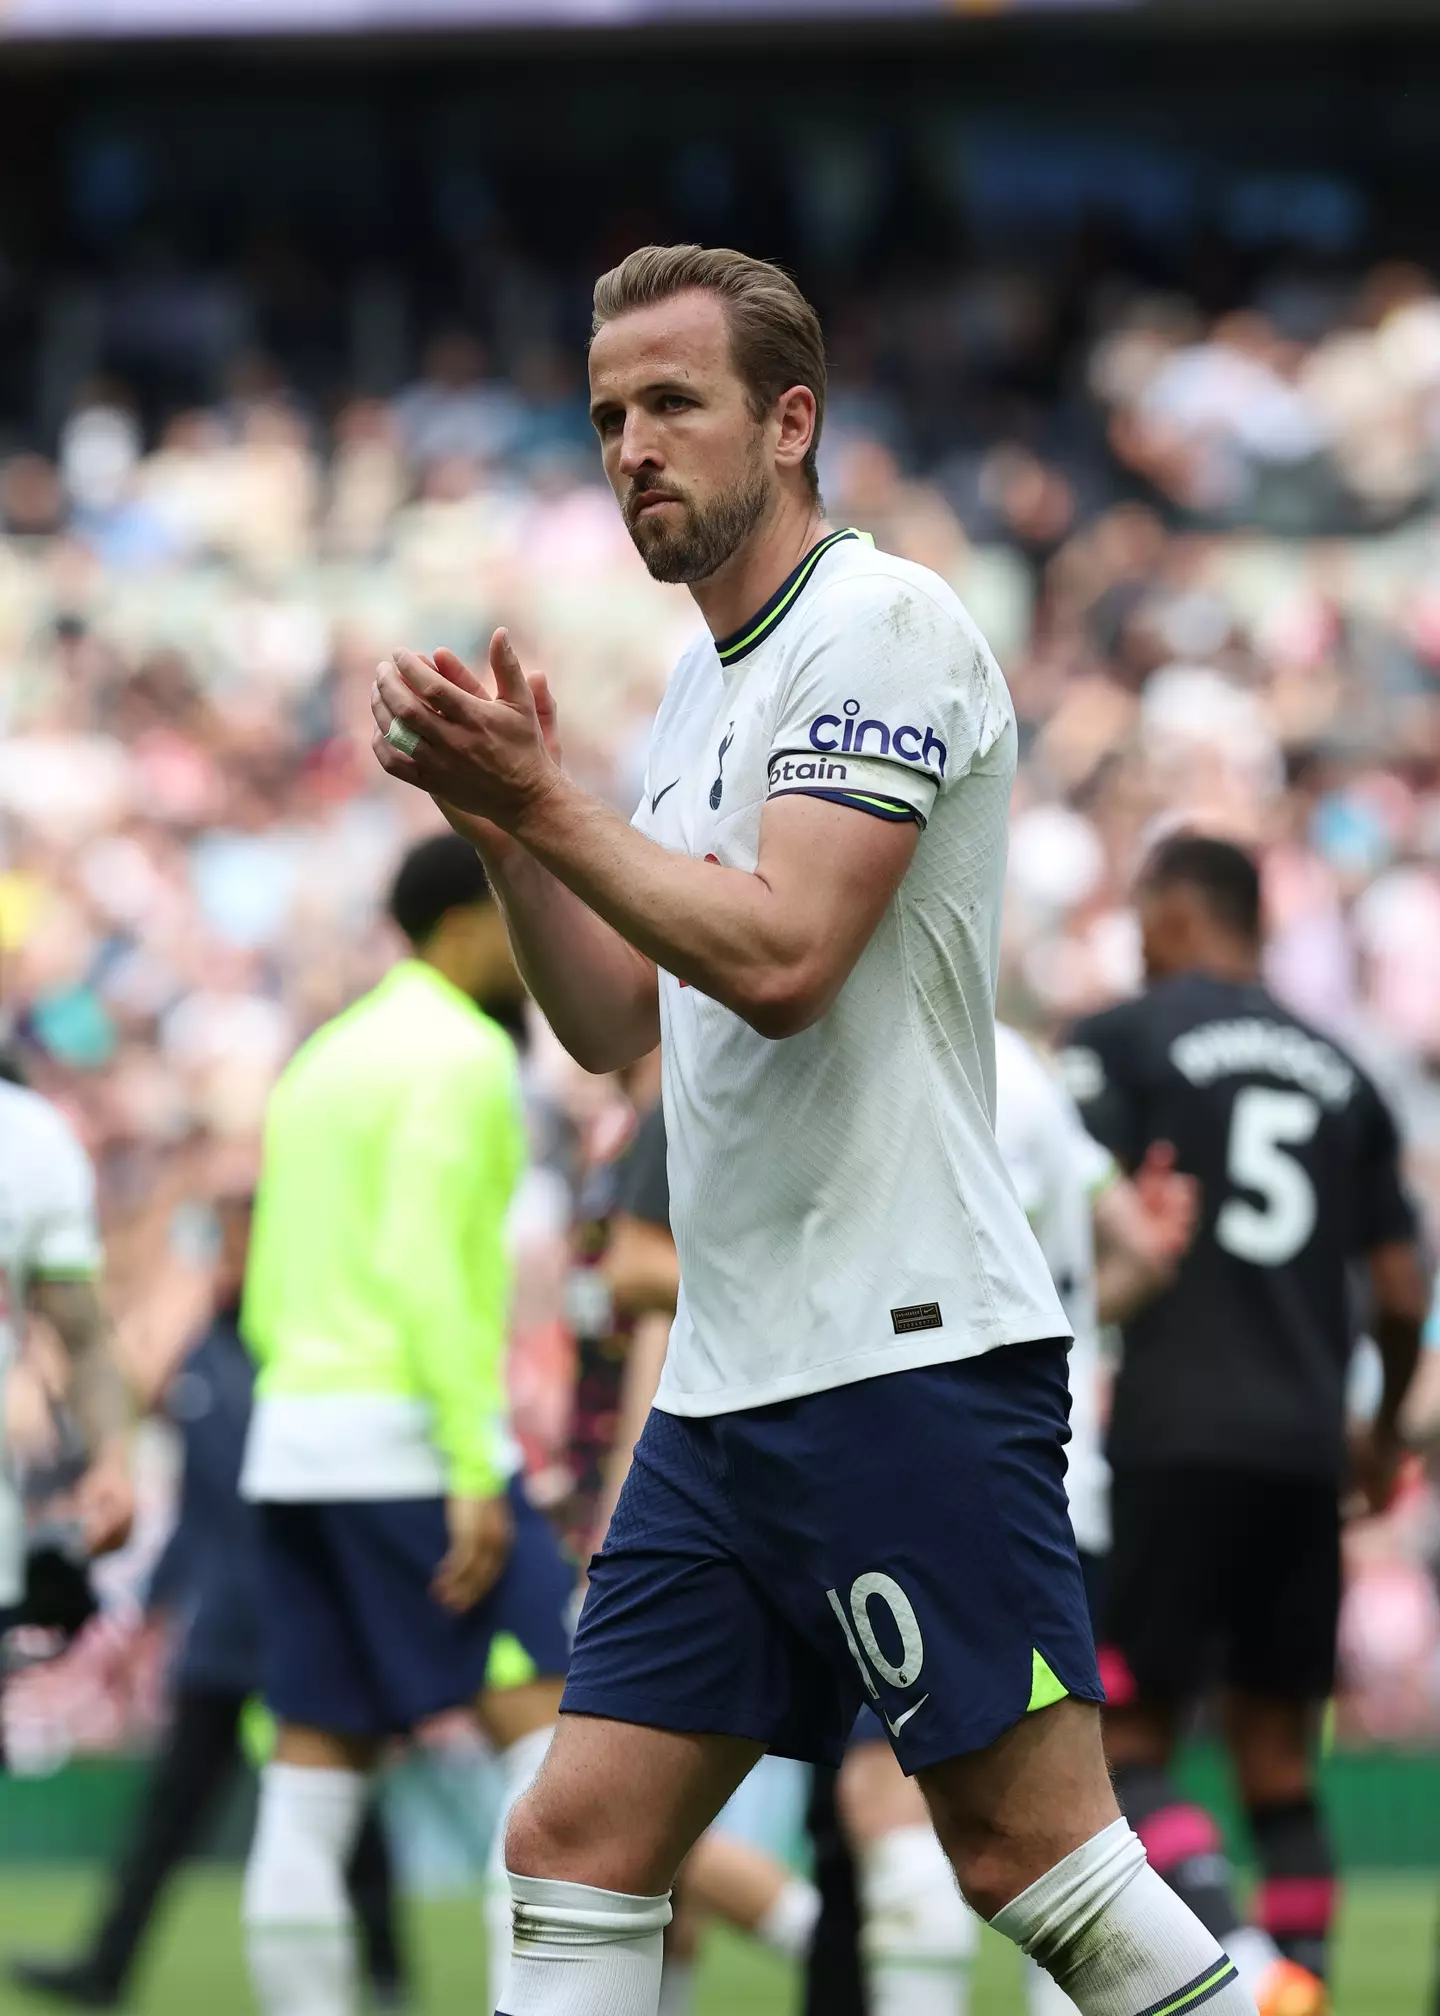 Harry Kane has previously been linked to Manchester United and Bayern Munich. (